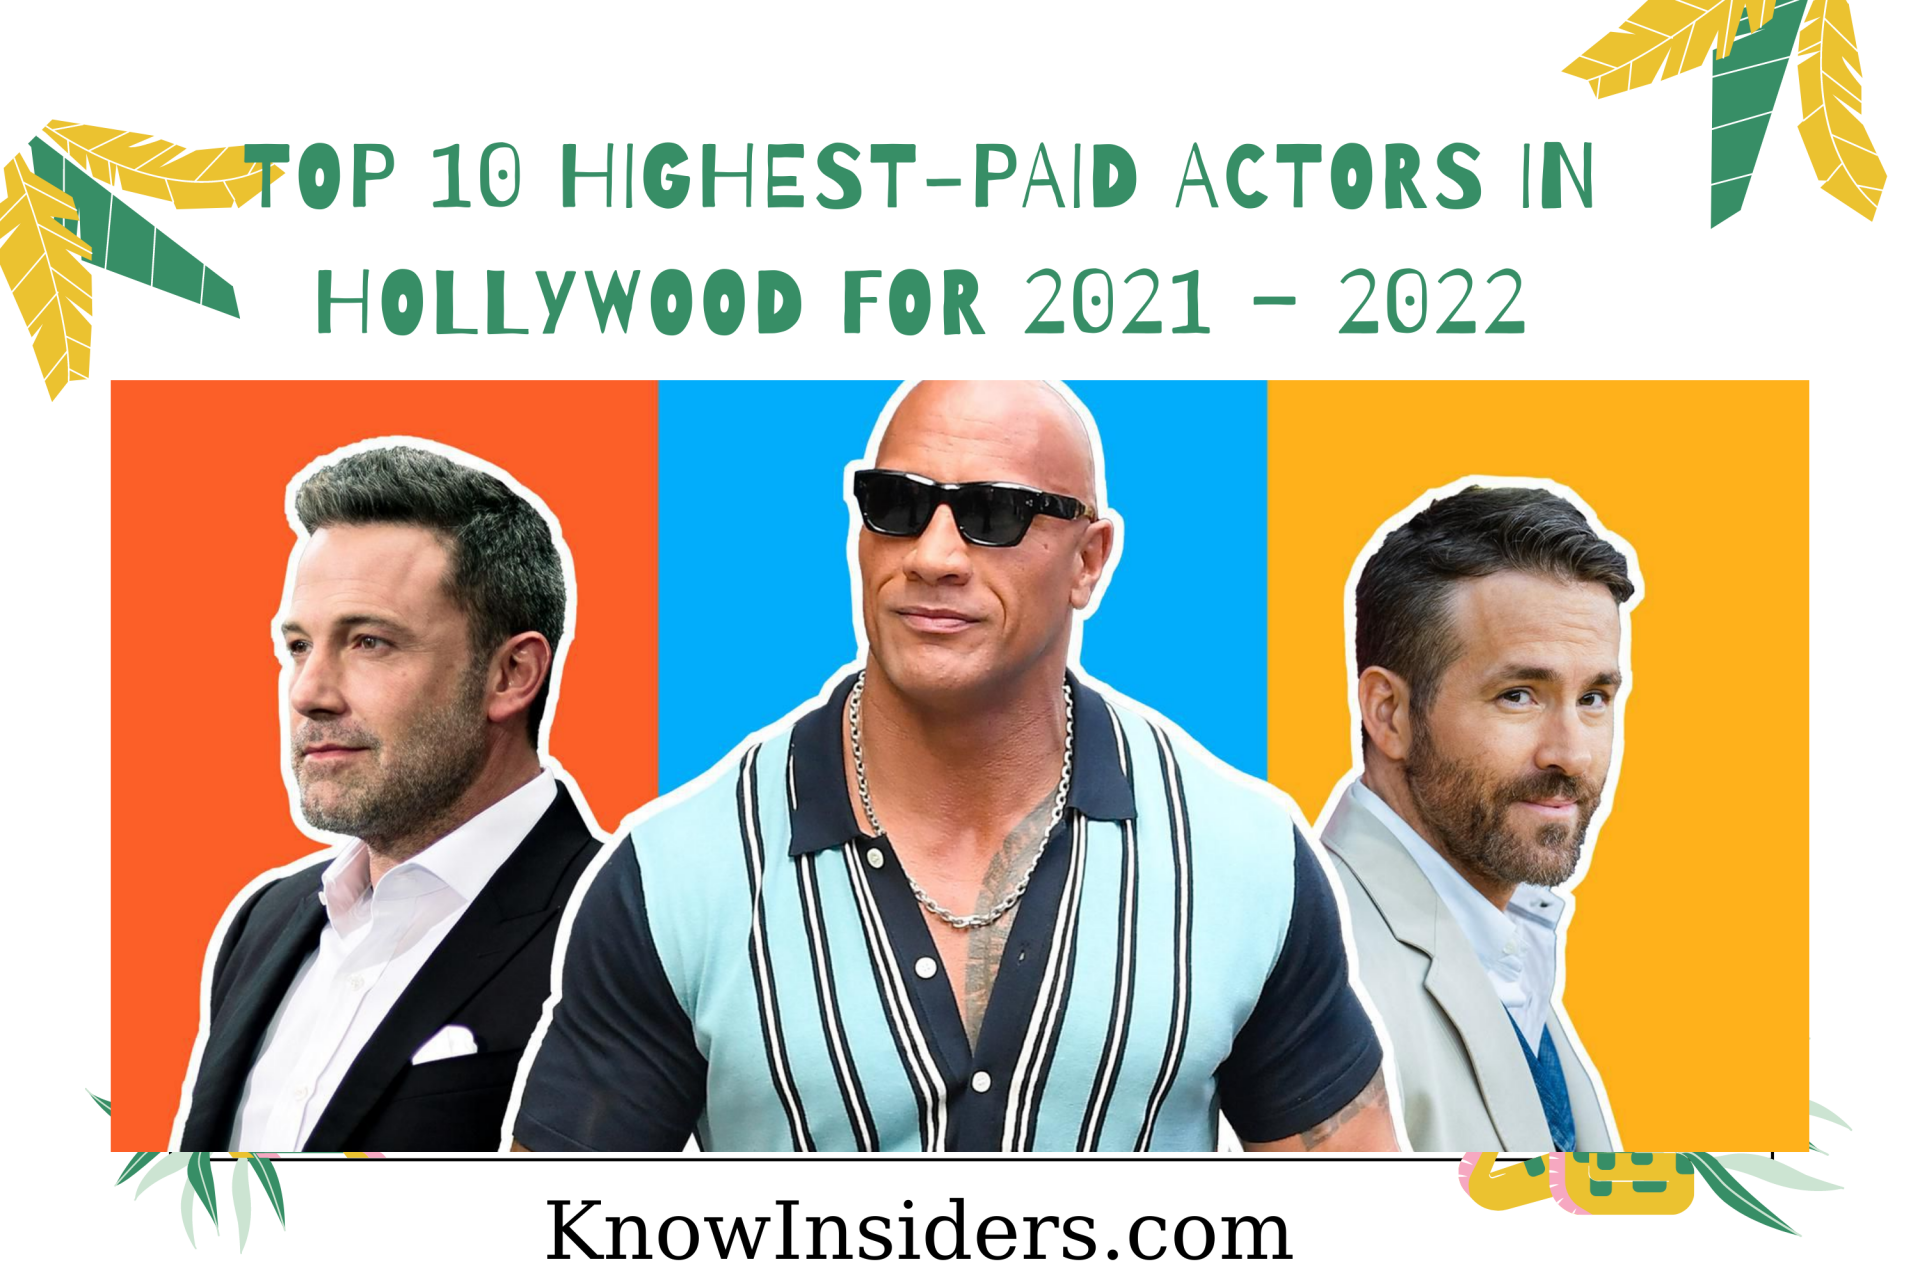 Top 10 Highest-Paid Actors in Hollywood Today